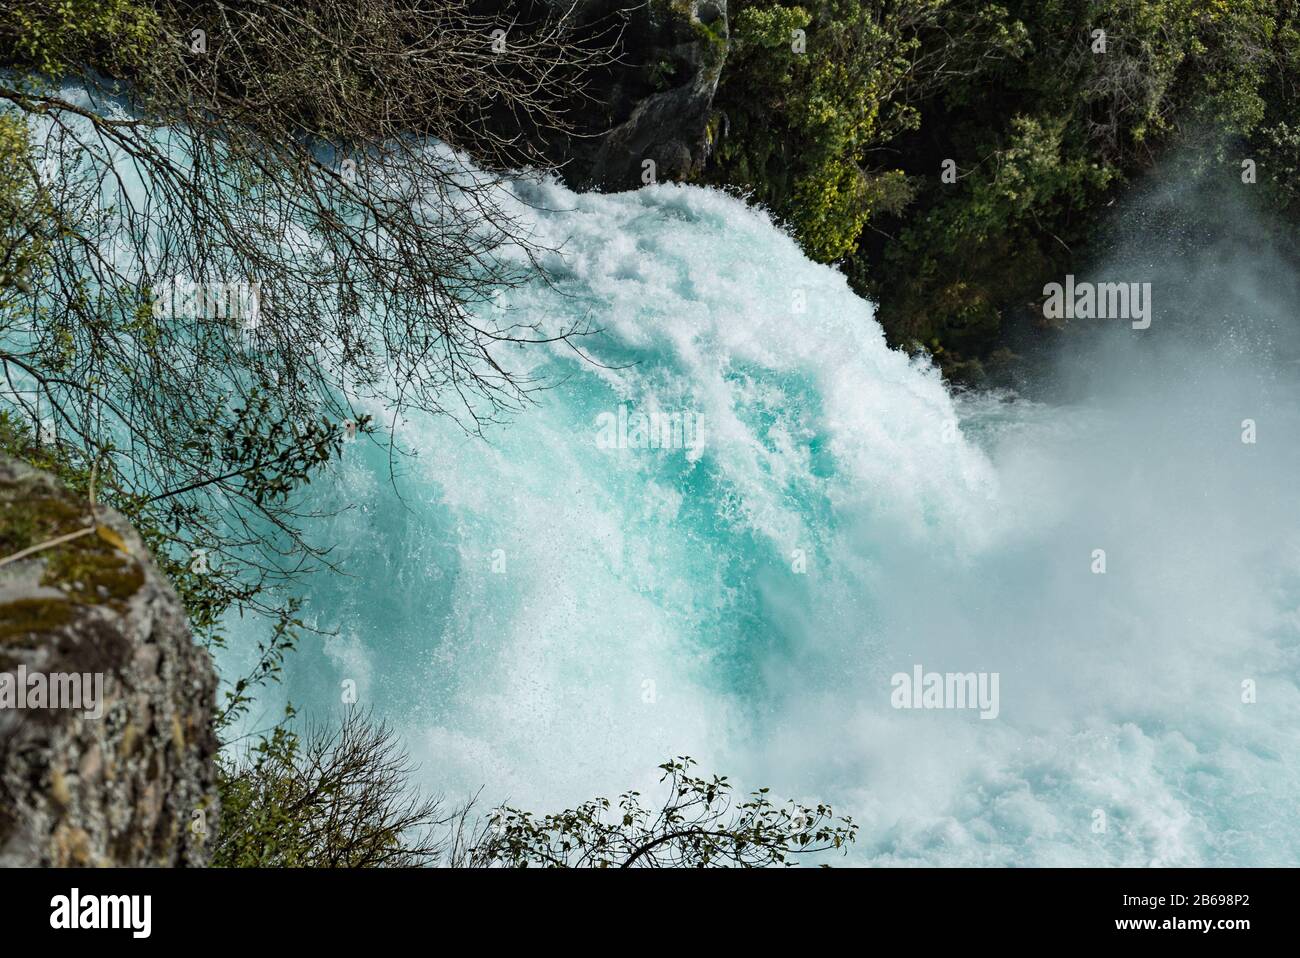 The Waikato River shows its power as it cascades over the foot of the Huka Falls near Taupo, New Zealand Stock Photo